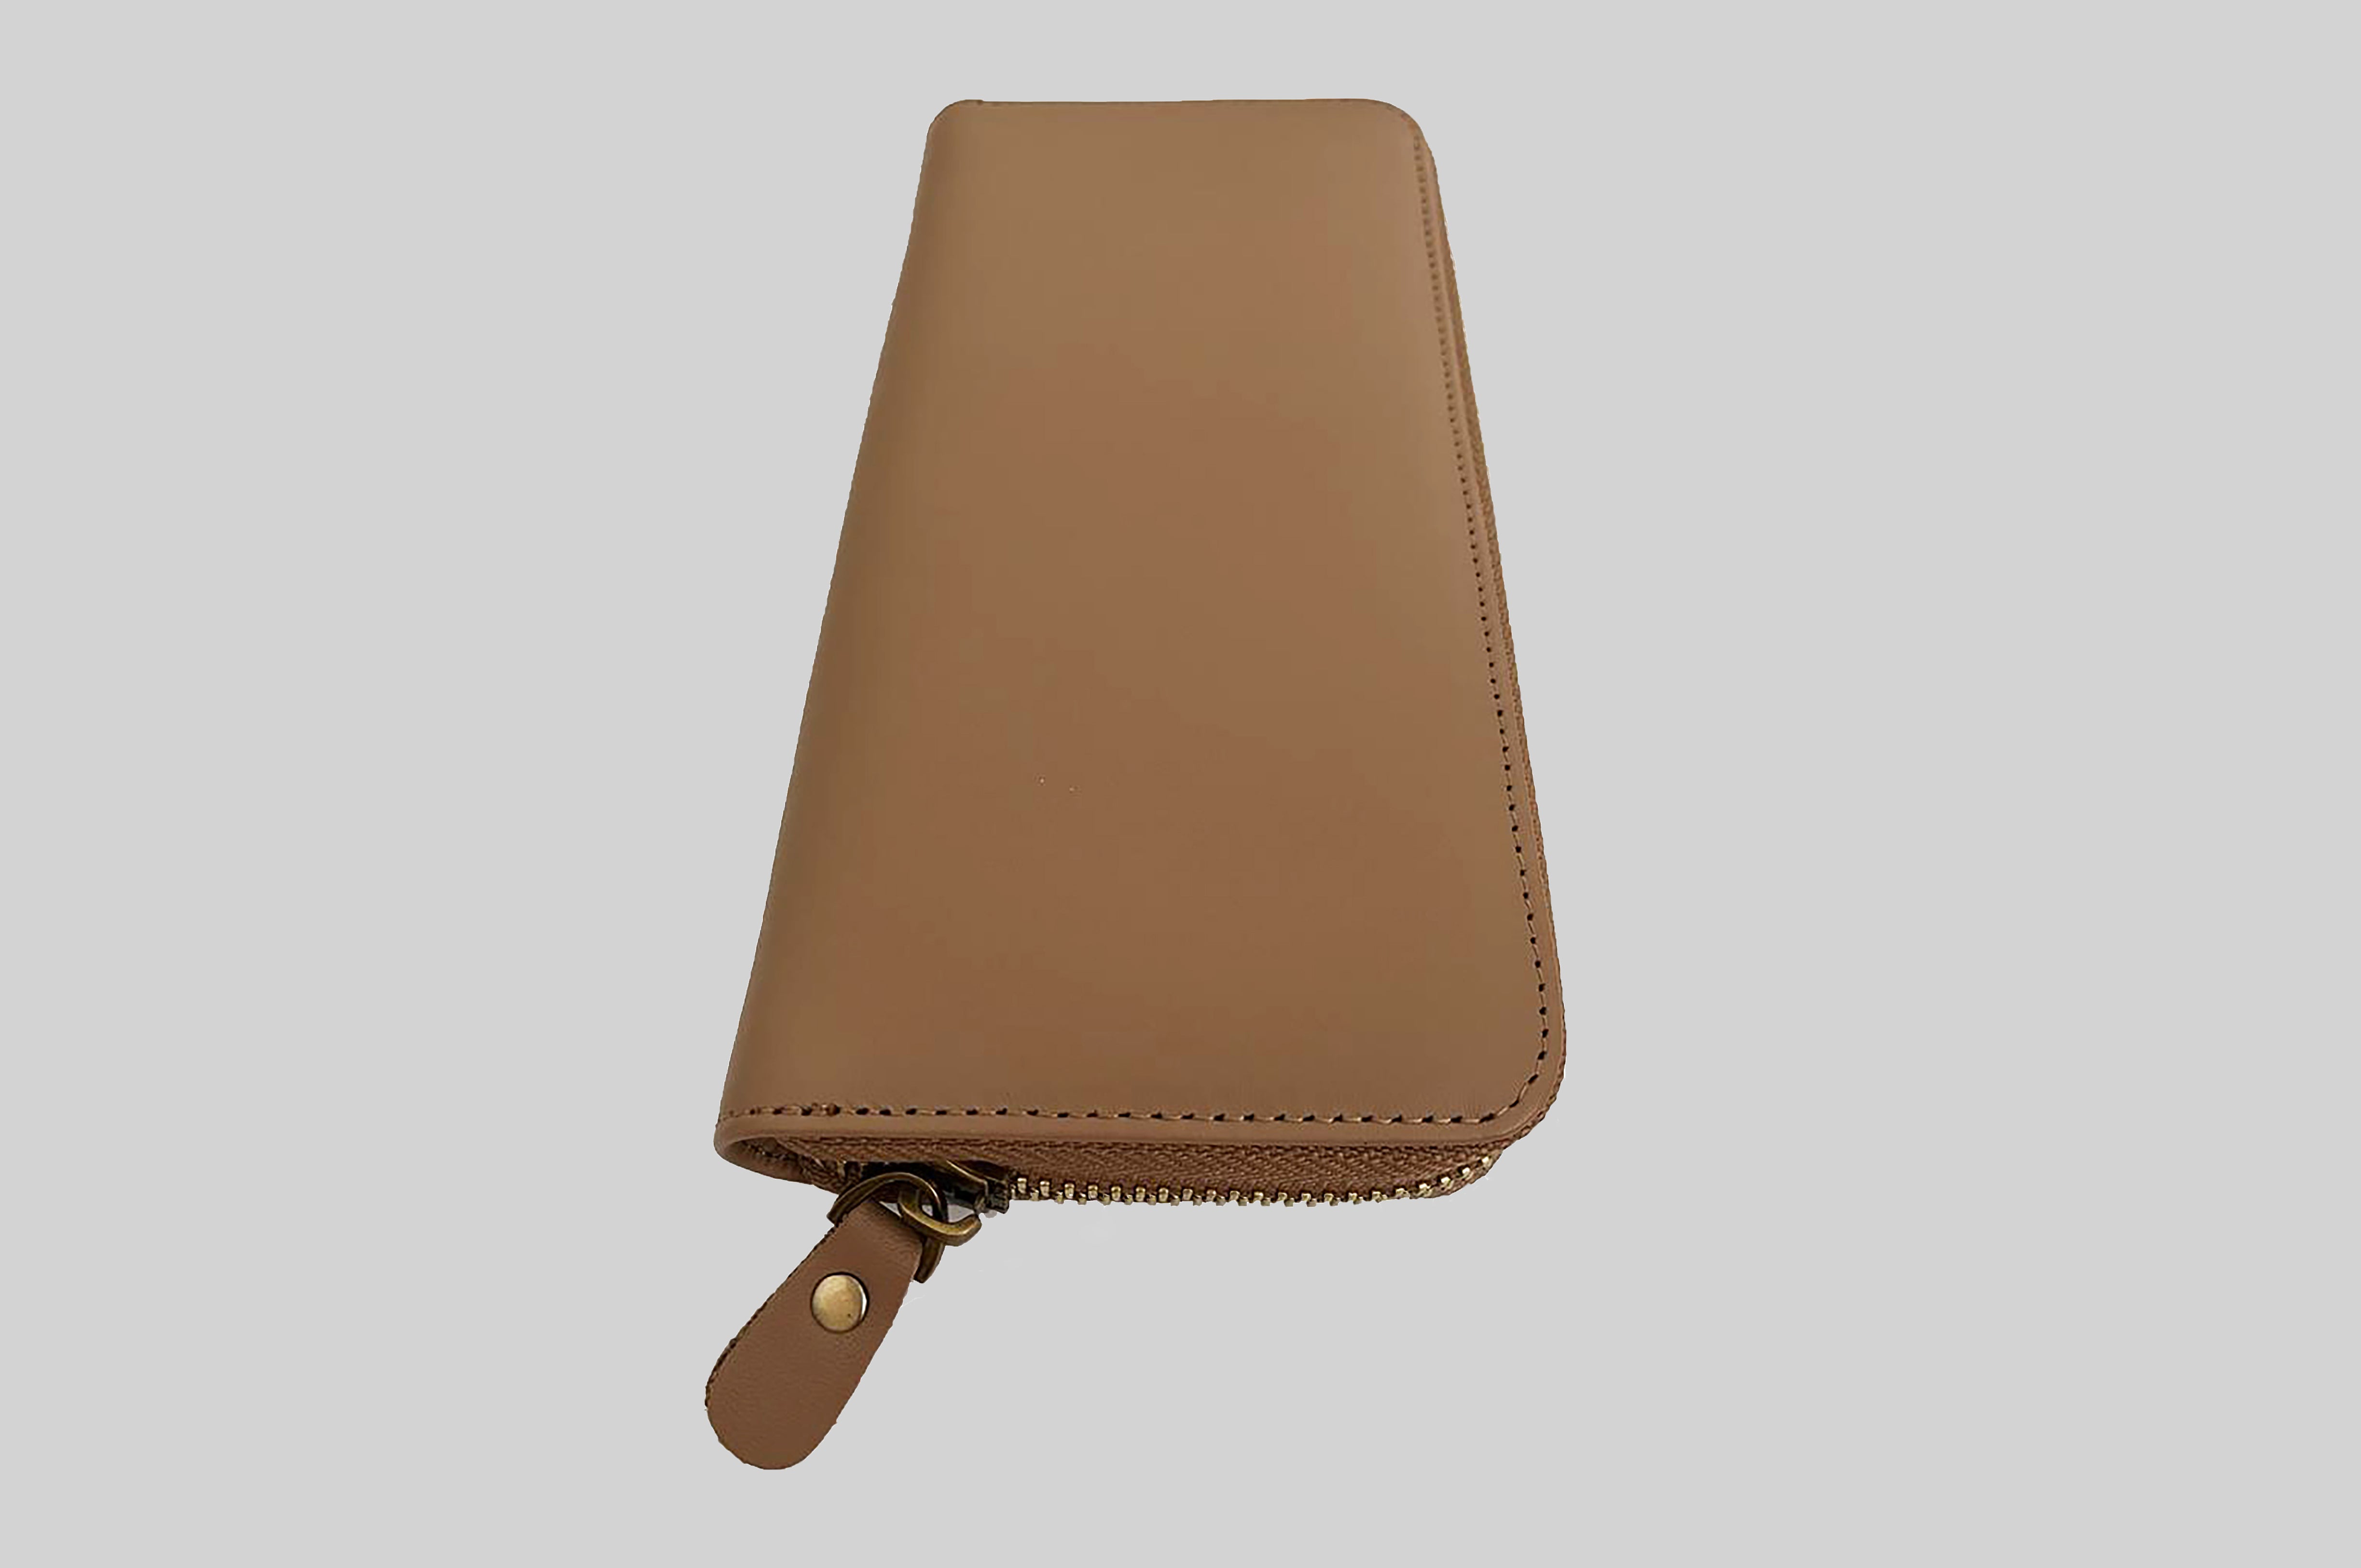 Patet long wallet in light brown (sold out)